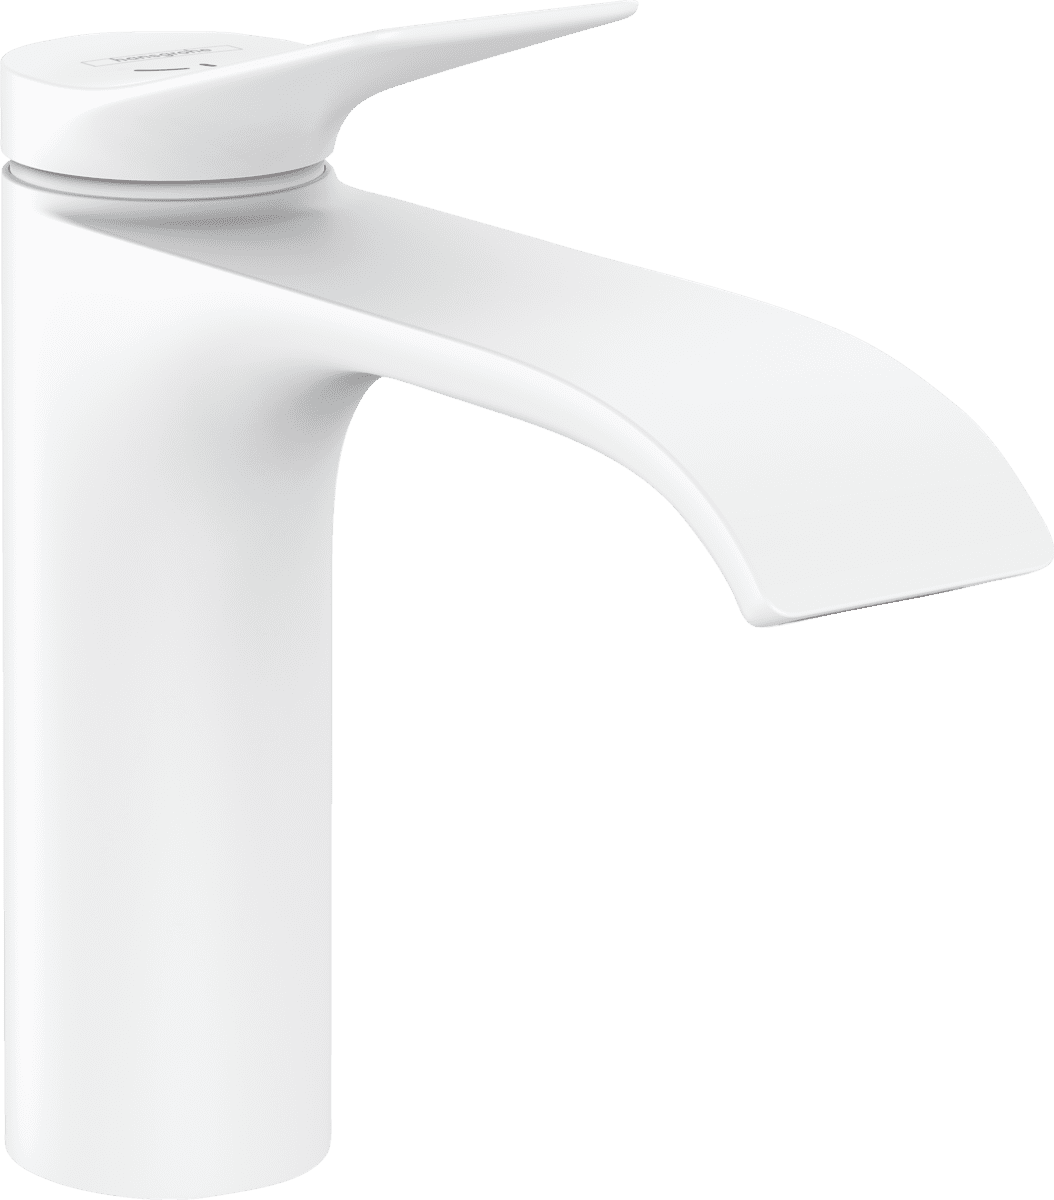 Picture of HANSGROHE Vivenis Single lever basin mixer 110 CoolStart with pop-up waste set #75023700 - Matt White